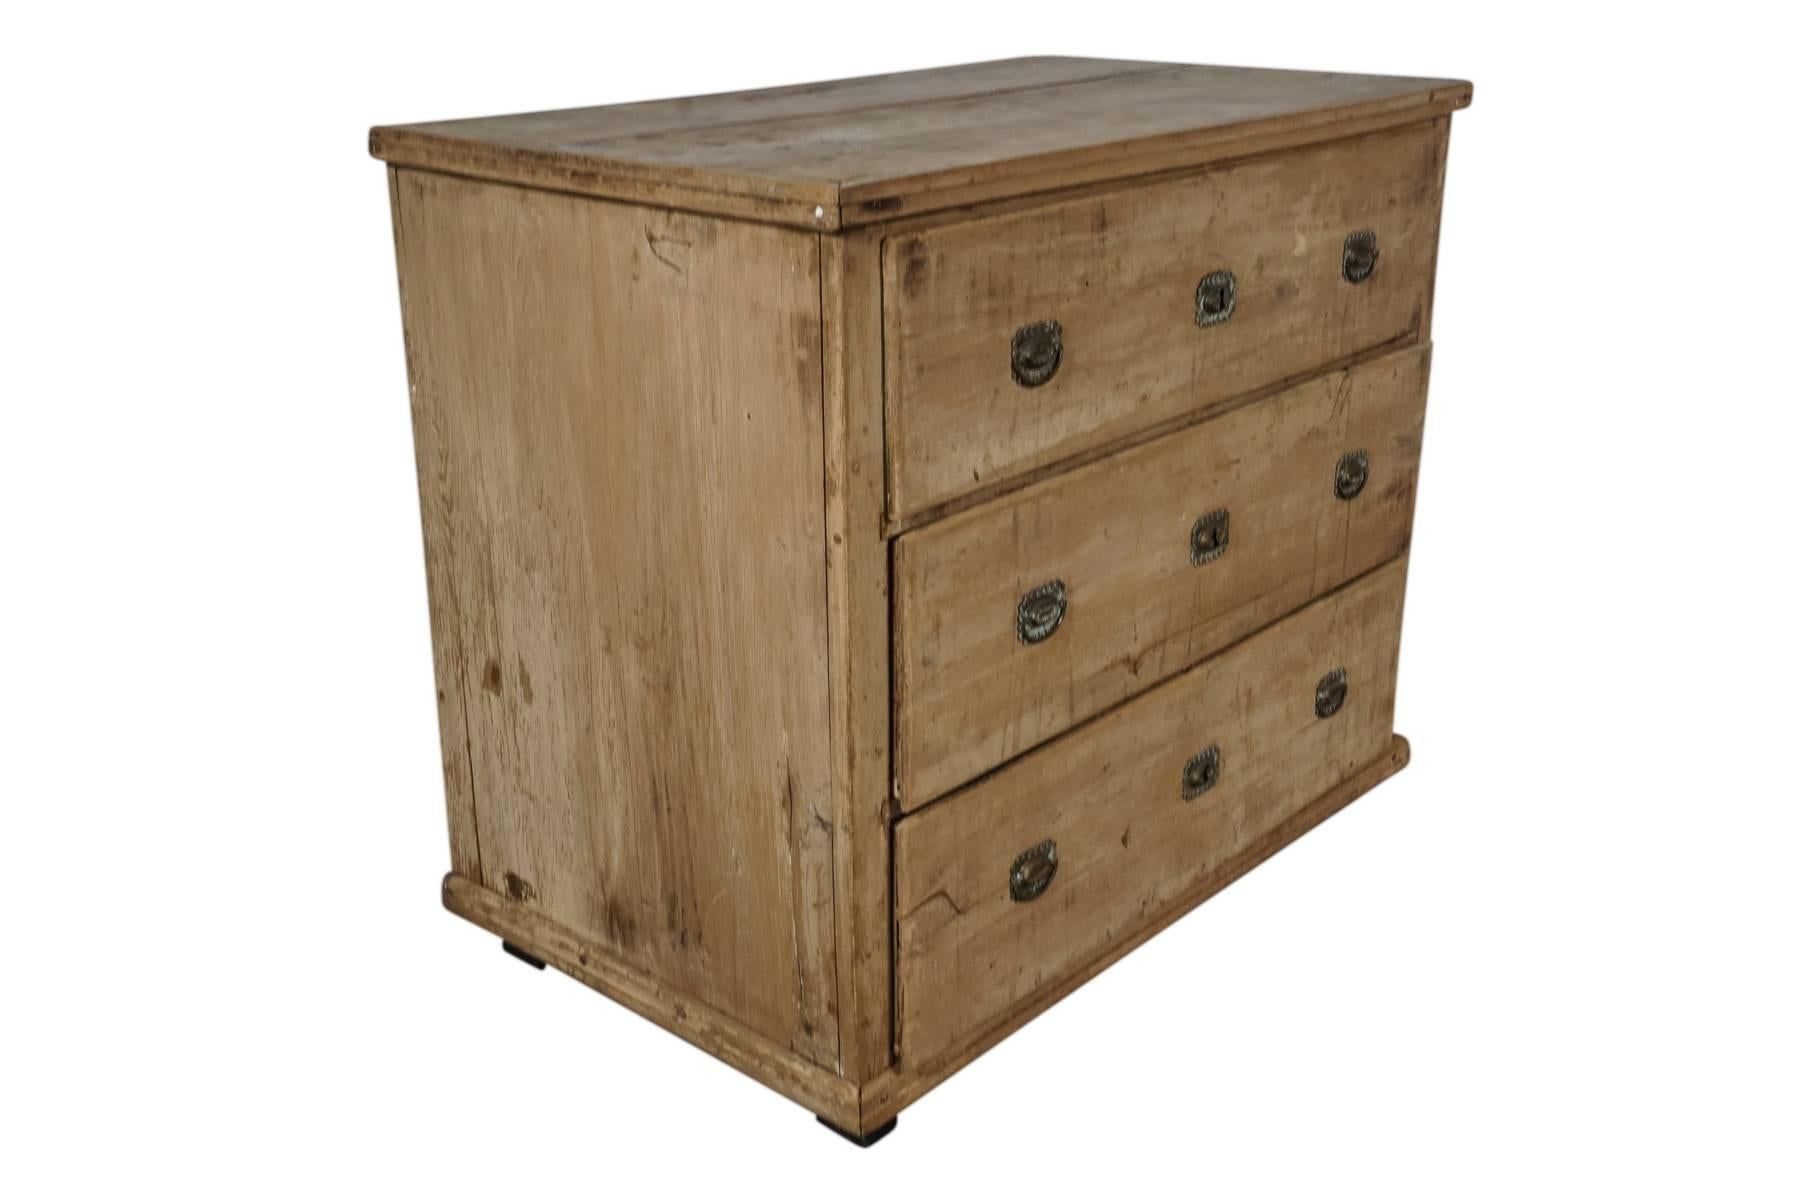 Late 19th Century Belgian Chest of Drawers with Original Surface, circa 1890